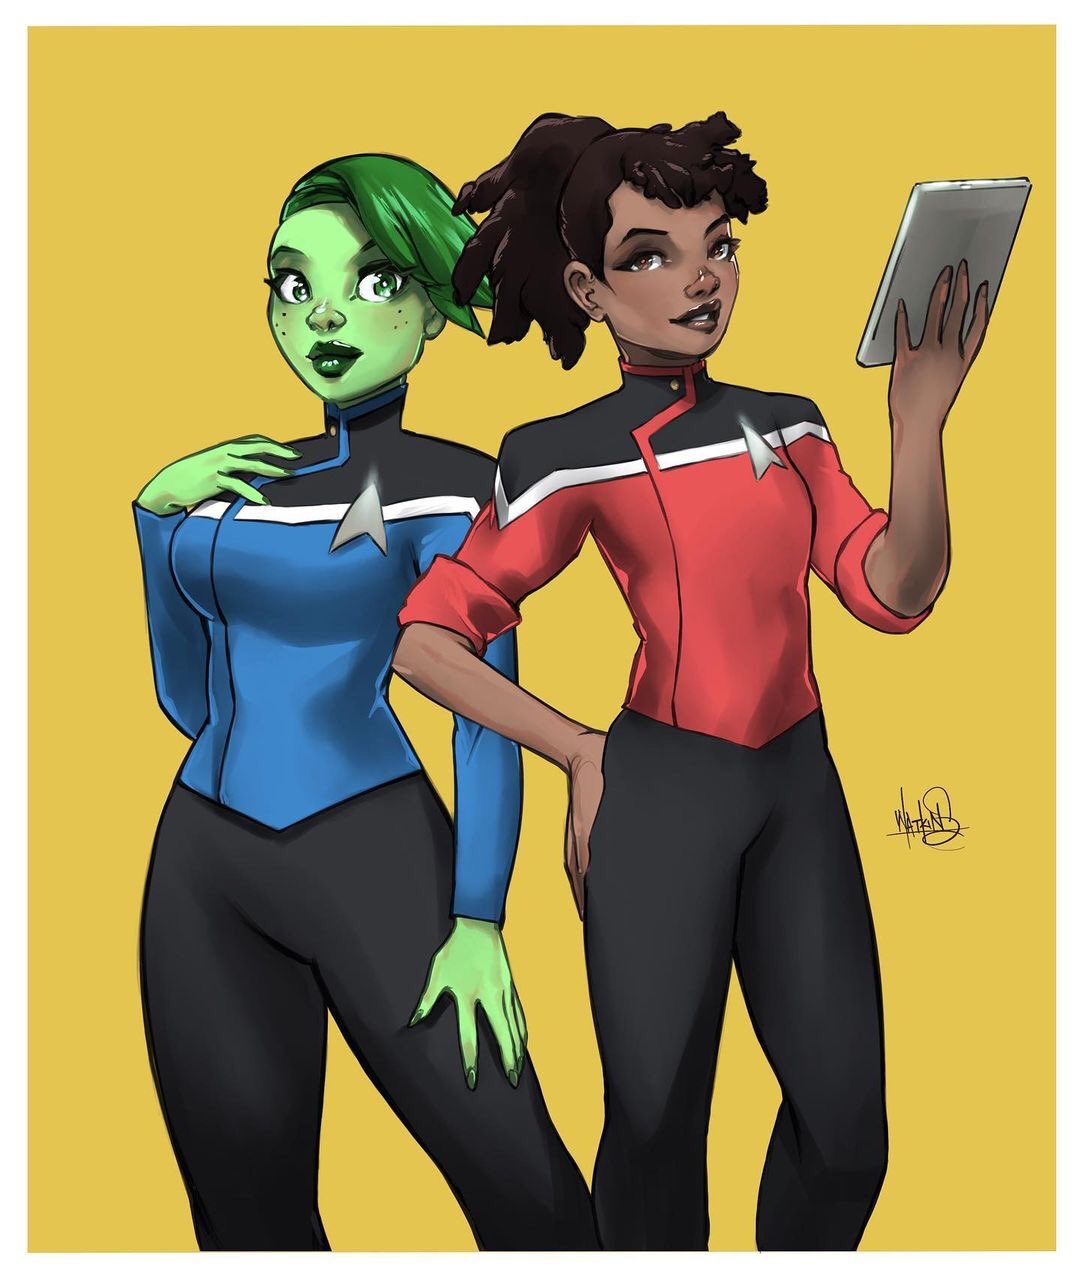 FTO: Talk on Twitter: "I'm never going to stop taking this show. Such a big fan. Source • #flatliner74 Tendi and Mariner. Fanart for Star Trek Lower #procreate #starTrek #